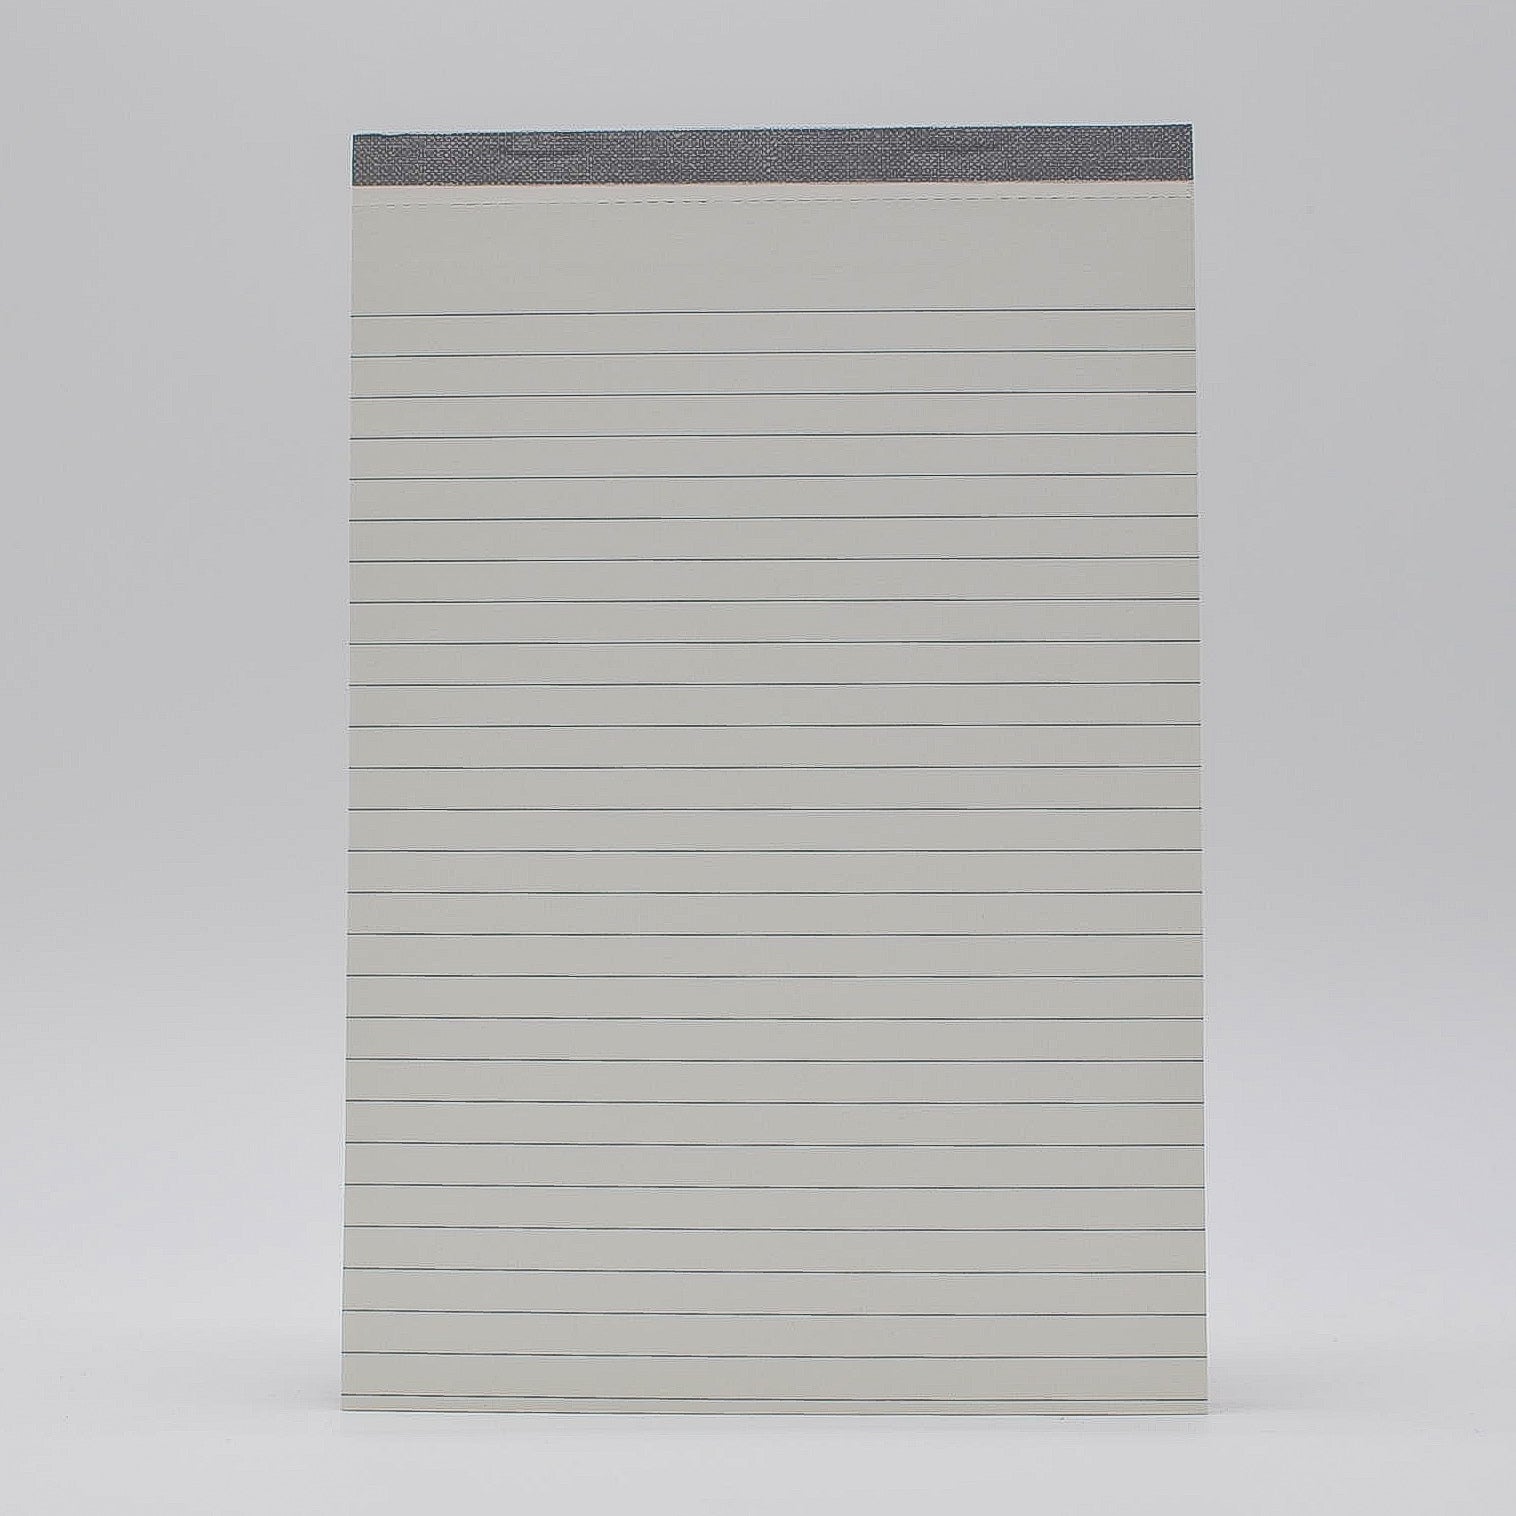 6 X 9 Memo Pads (Pack of 3) note pad notes sheets ruled white